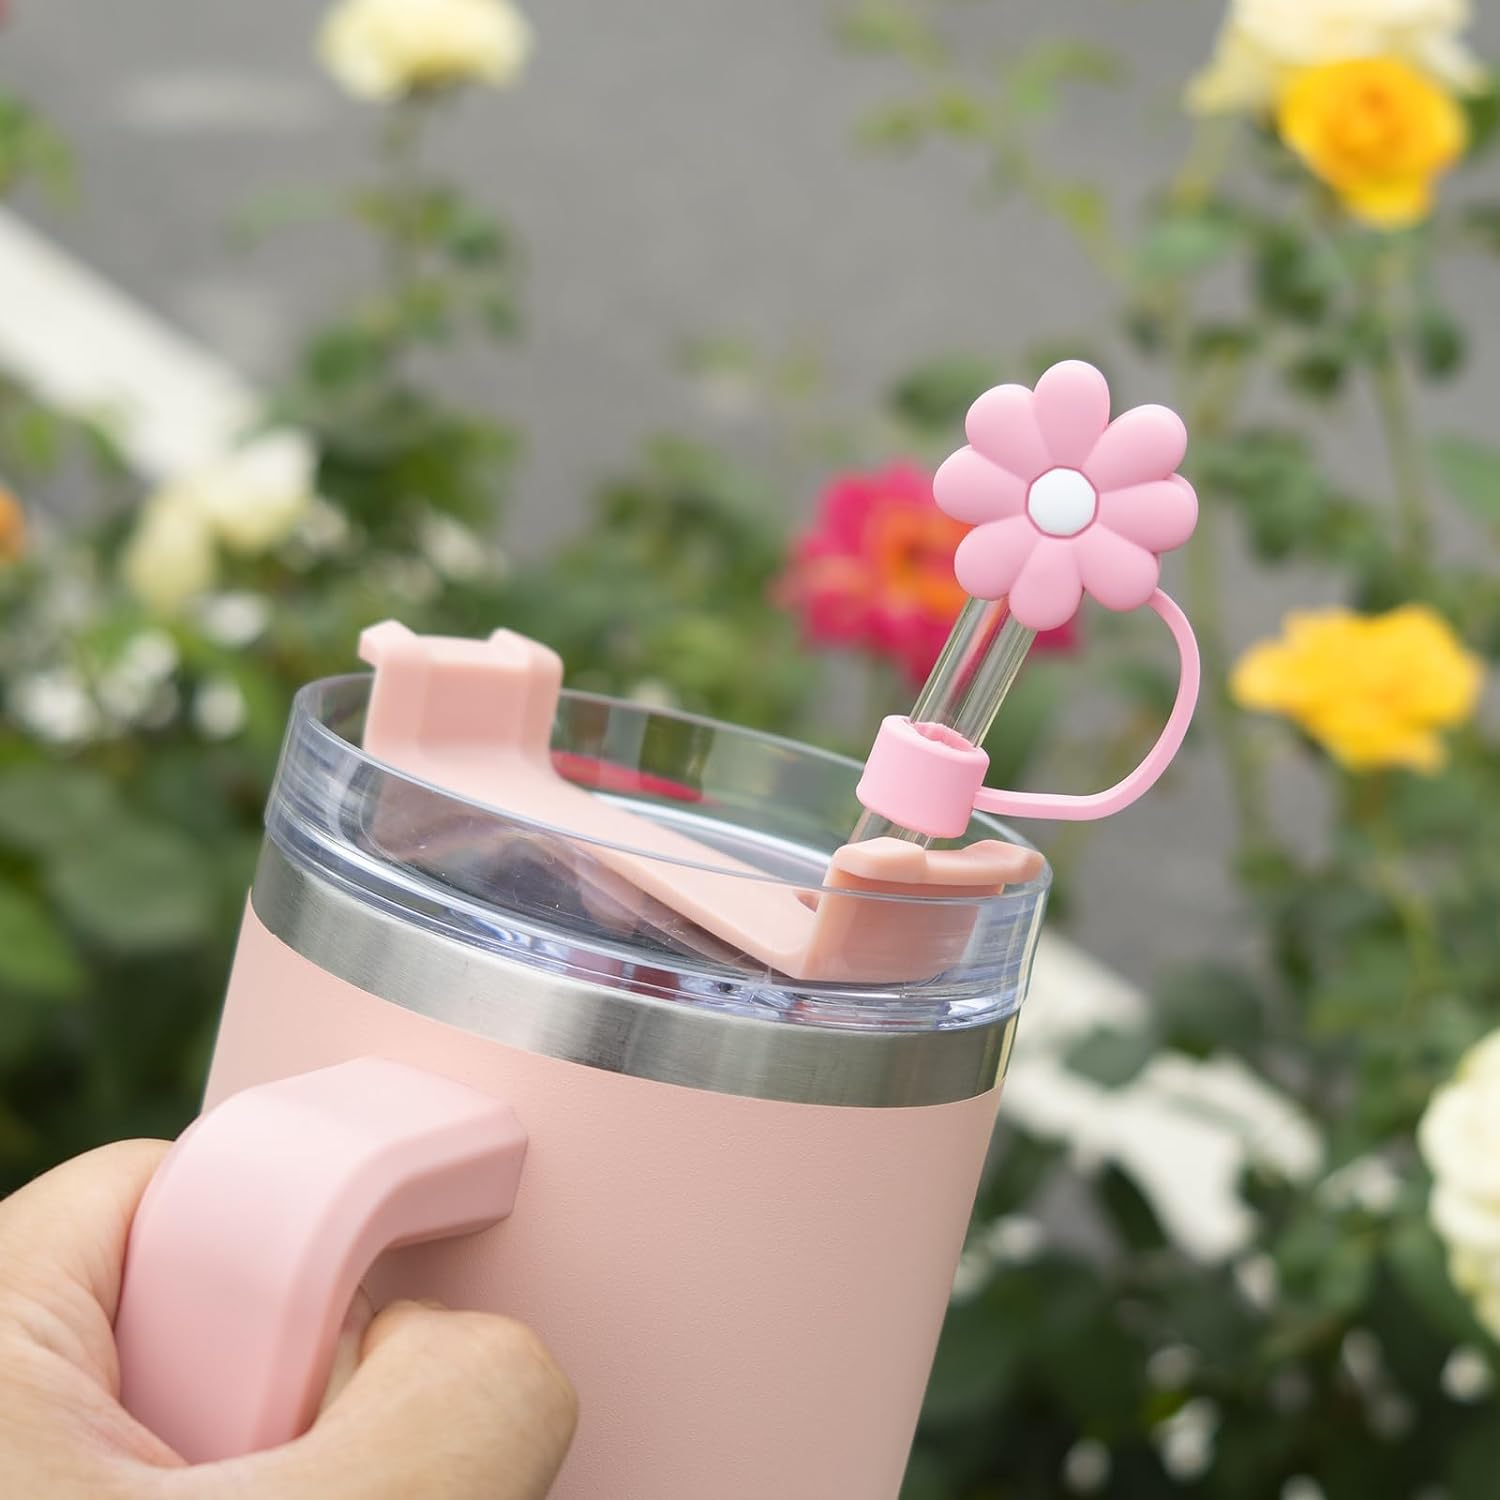 4Pcs 0.4in Diameter Cute Silicone Straw Covers Cap for Stanley Cup, Dust-Proof Drinking Straw Reusable Straw Tips Lids